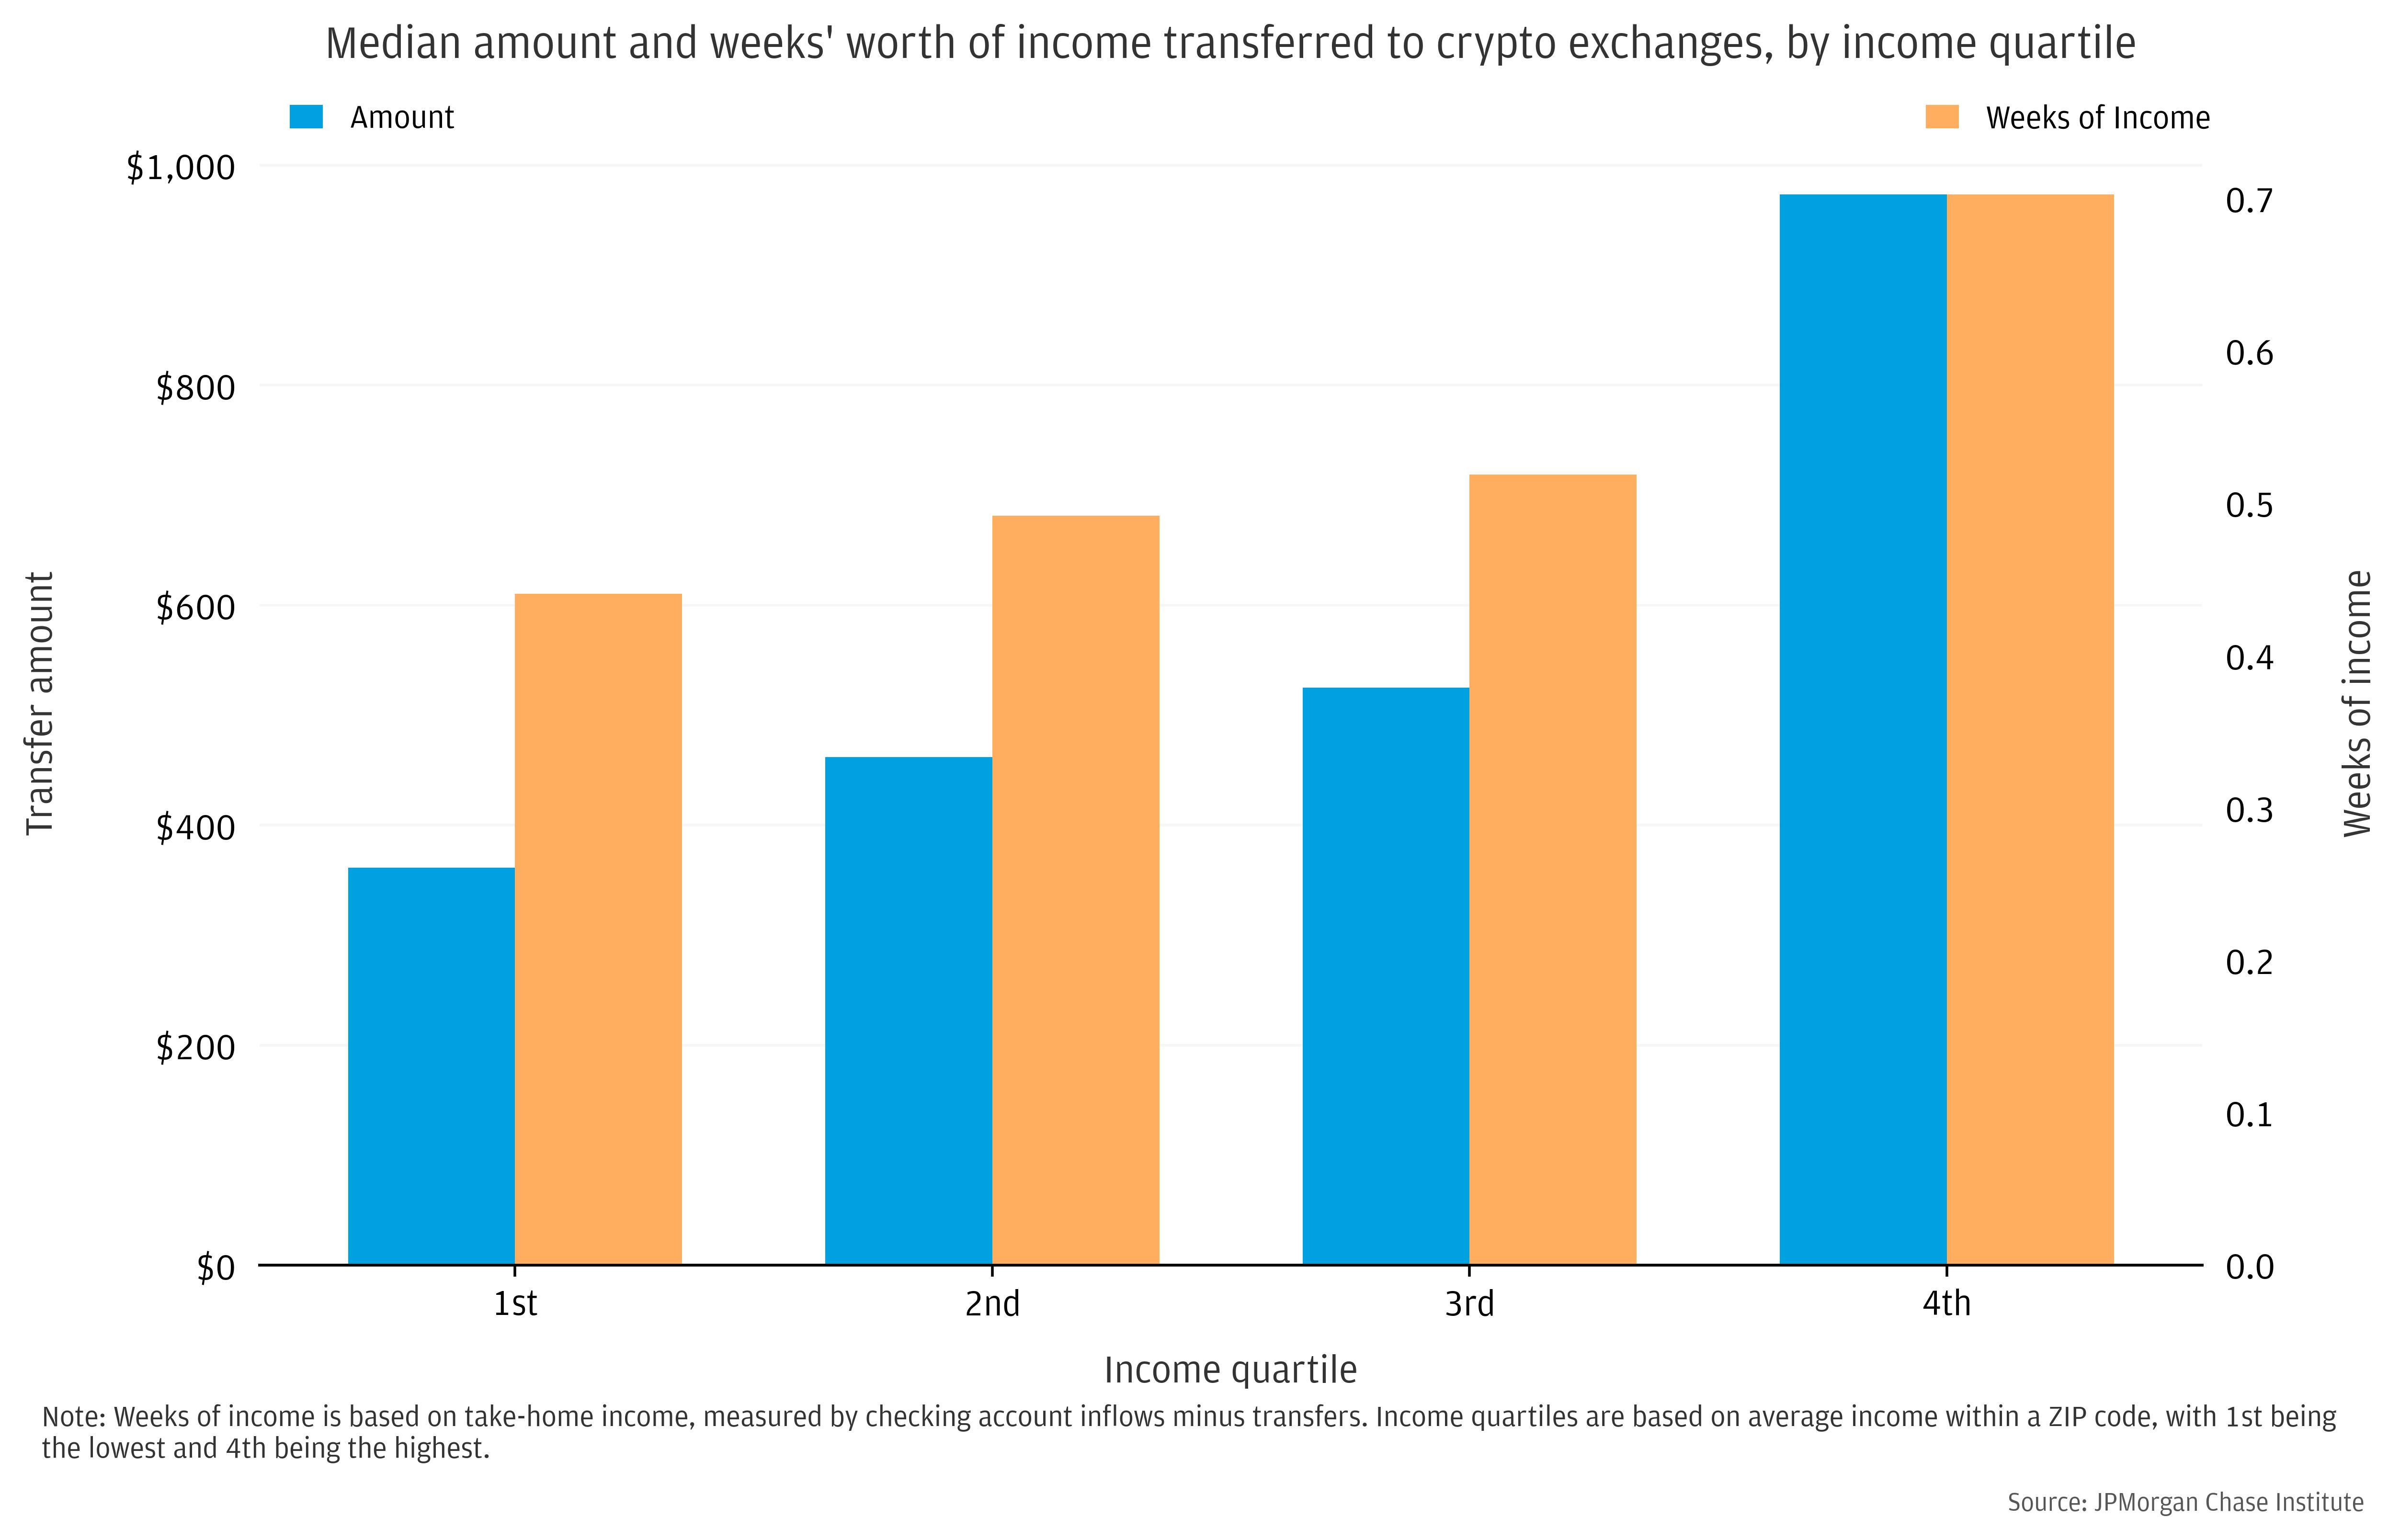 Higher income individuals have transferred more money into crypto accounts, measured in dollar values and when scaled by weeks’ worth of take-home-pay.